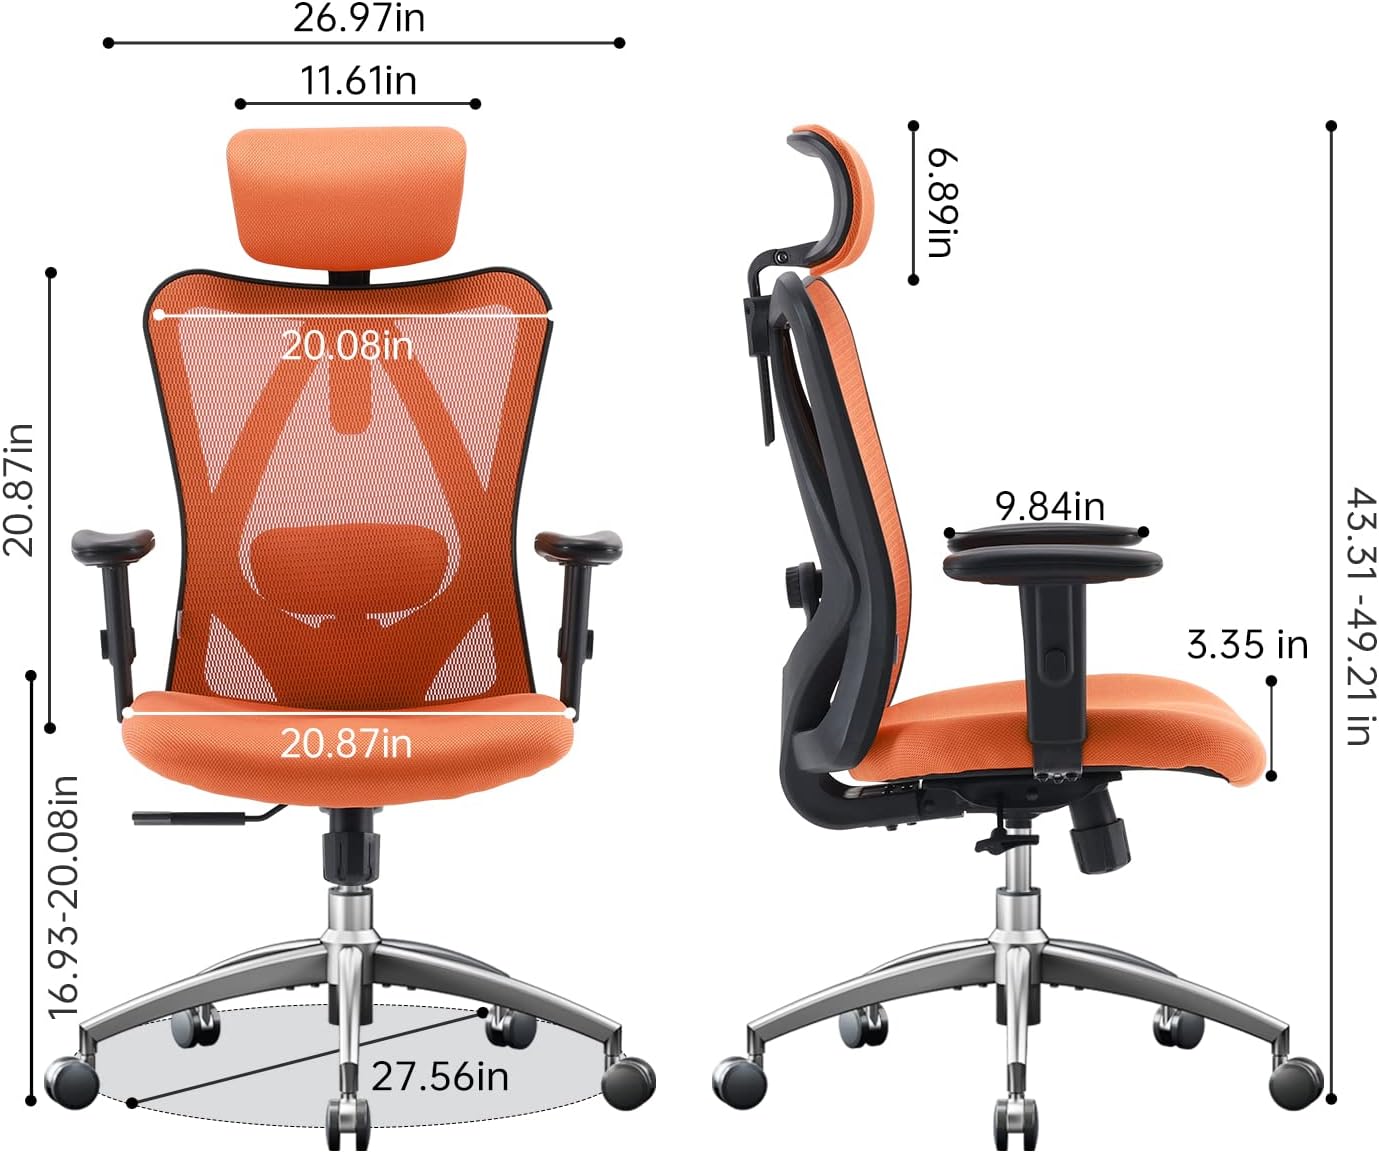 SIHOO Recliner Computer Office Chair with Adjustable S-Shaped